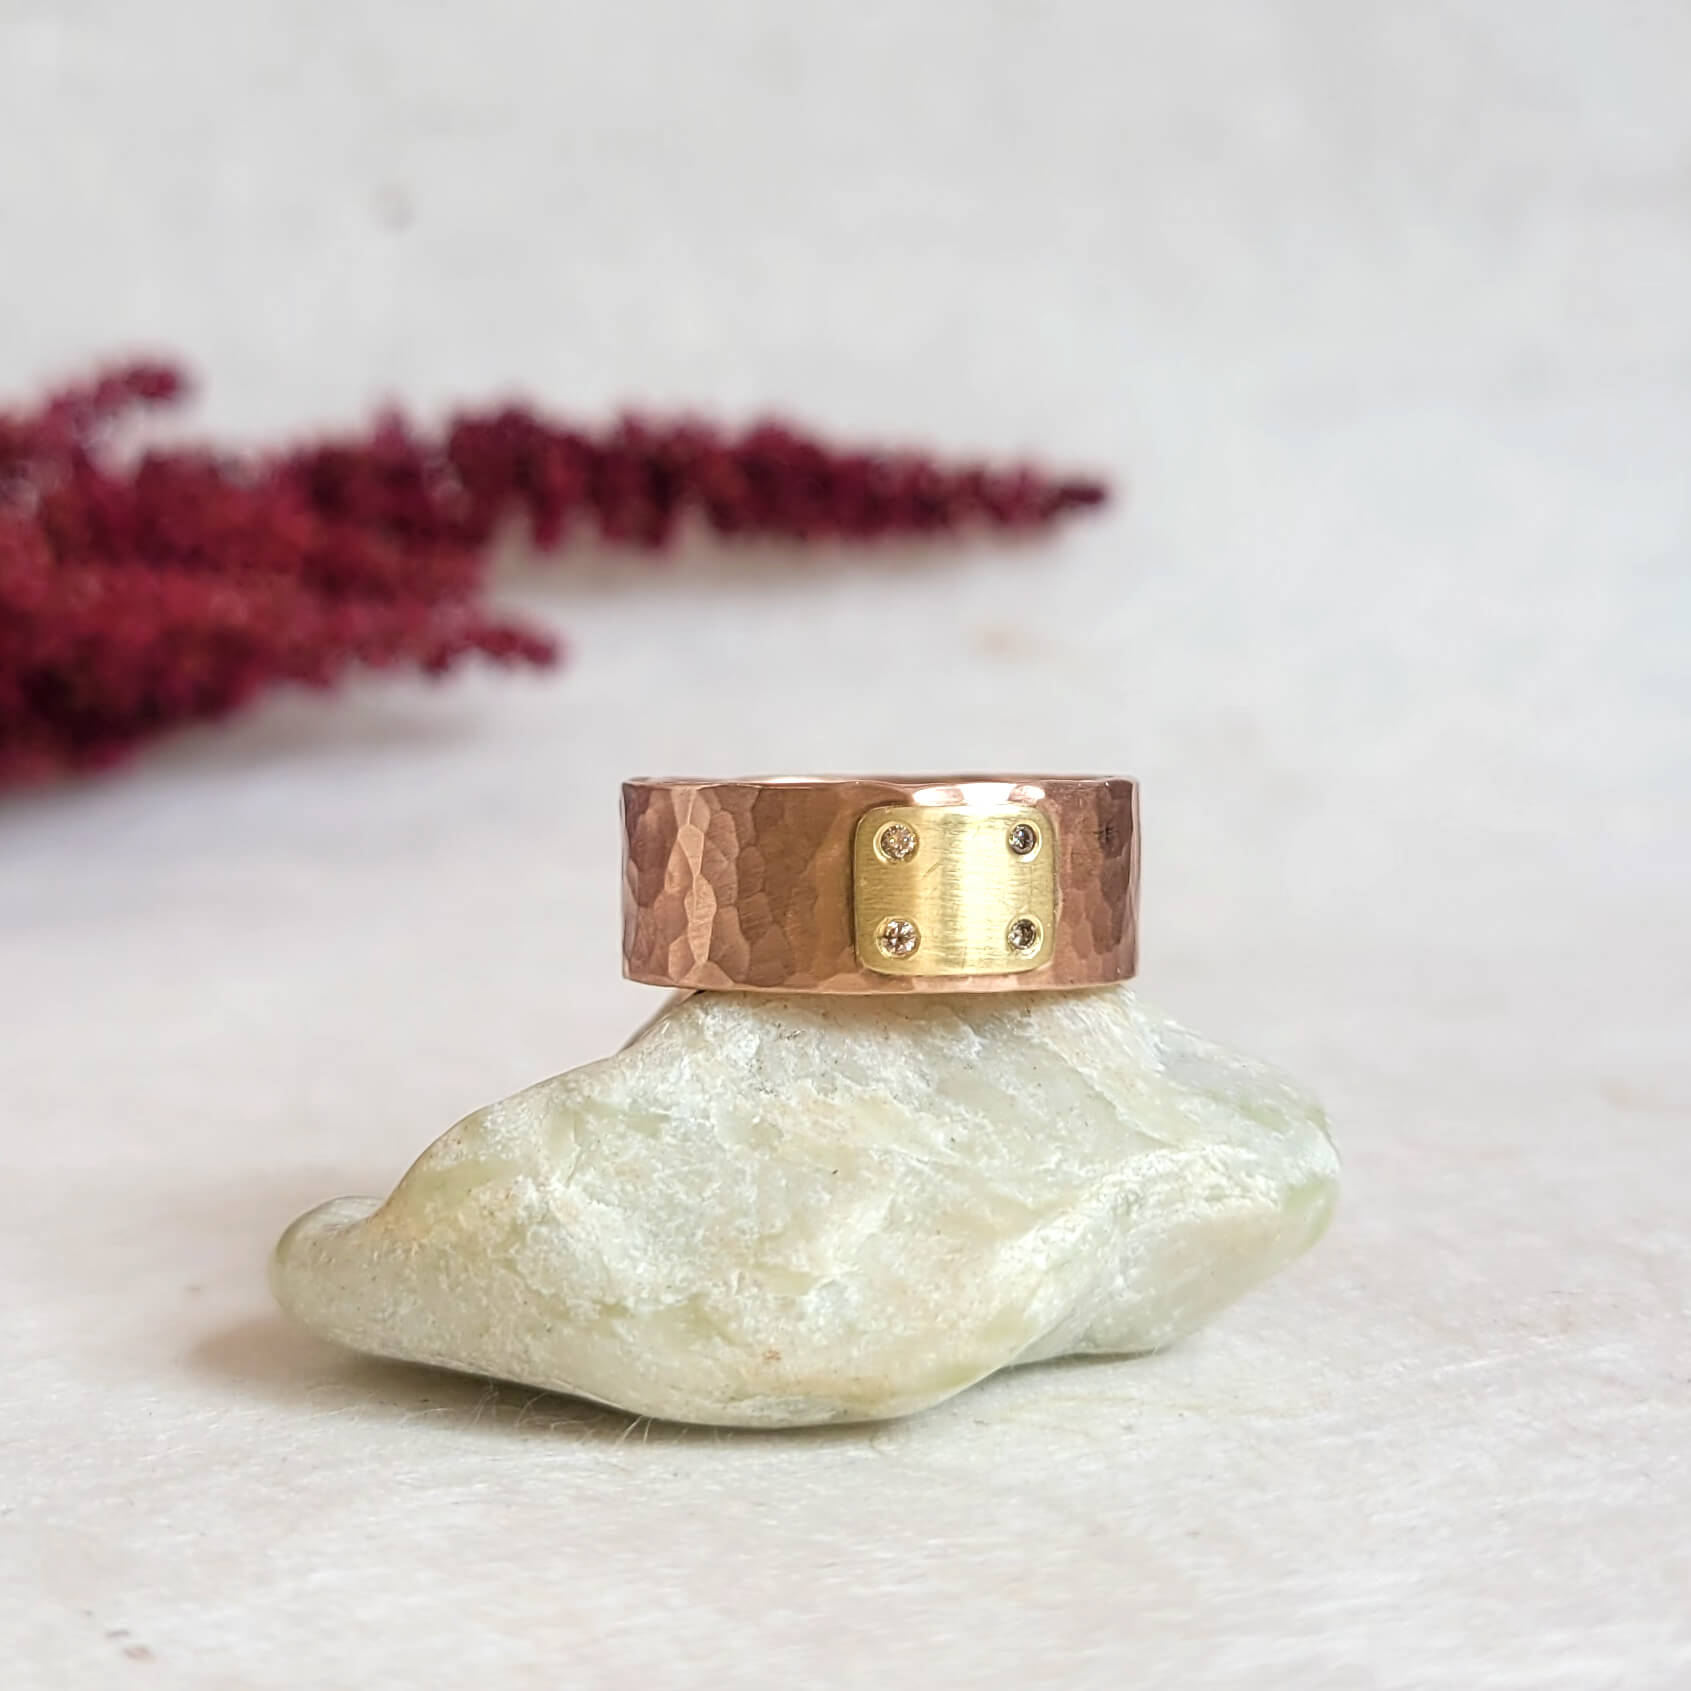 Red gold and yellow gold wide band with champagne diamond accents. Handmade by EC Design Jewelry in Minneapolis, MN using recycled metal.